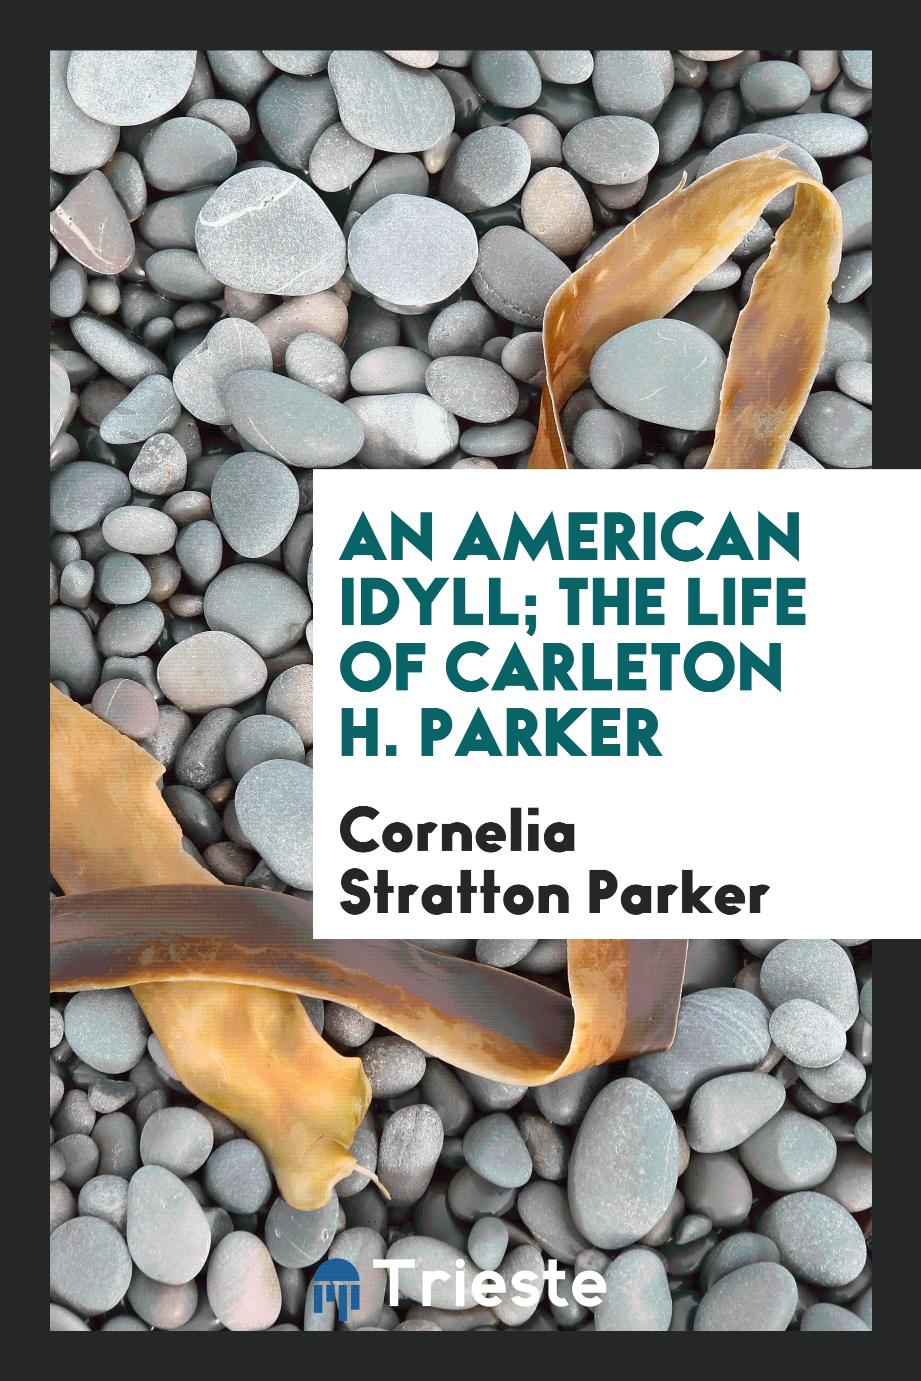 An American idyll; the life of Carleton H. Parker